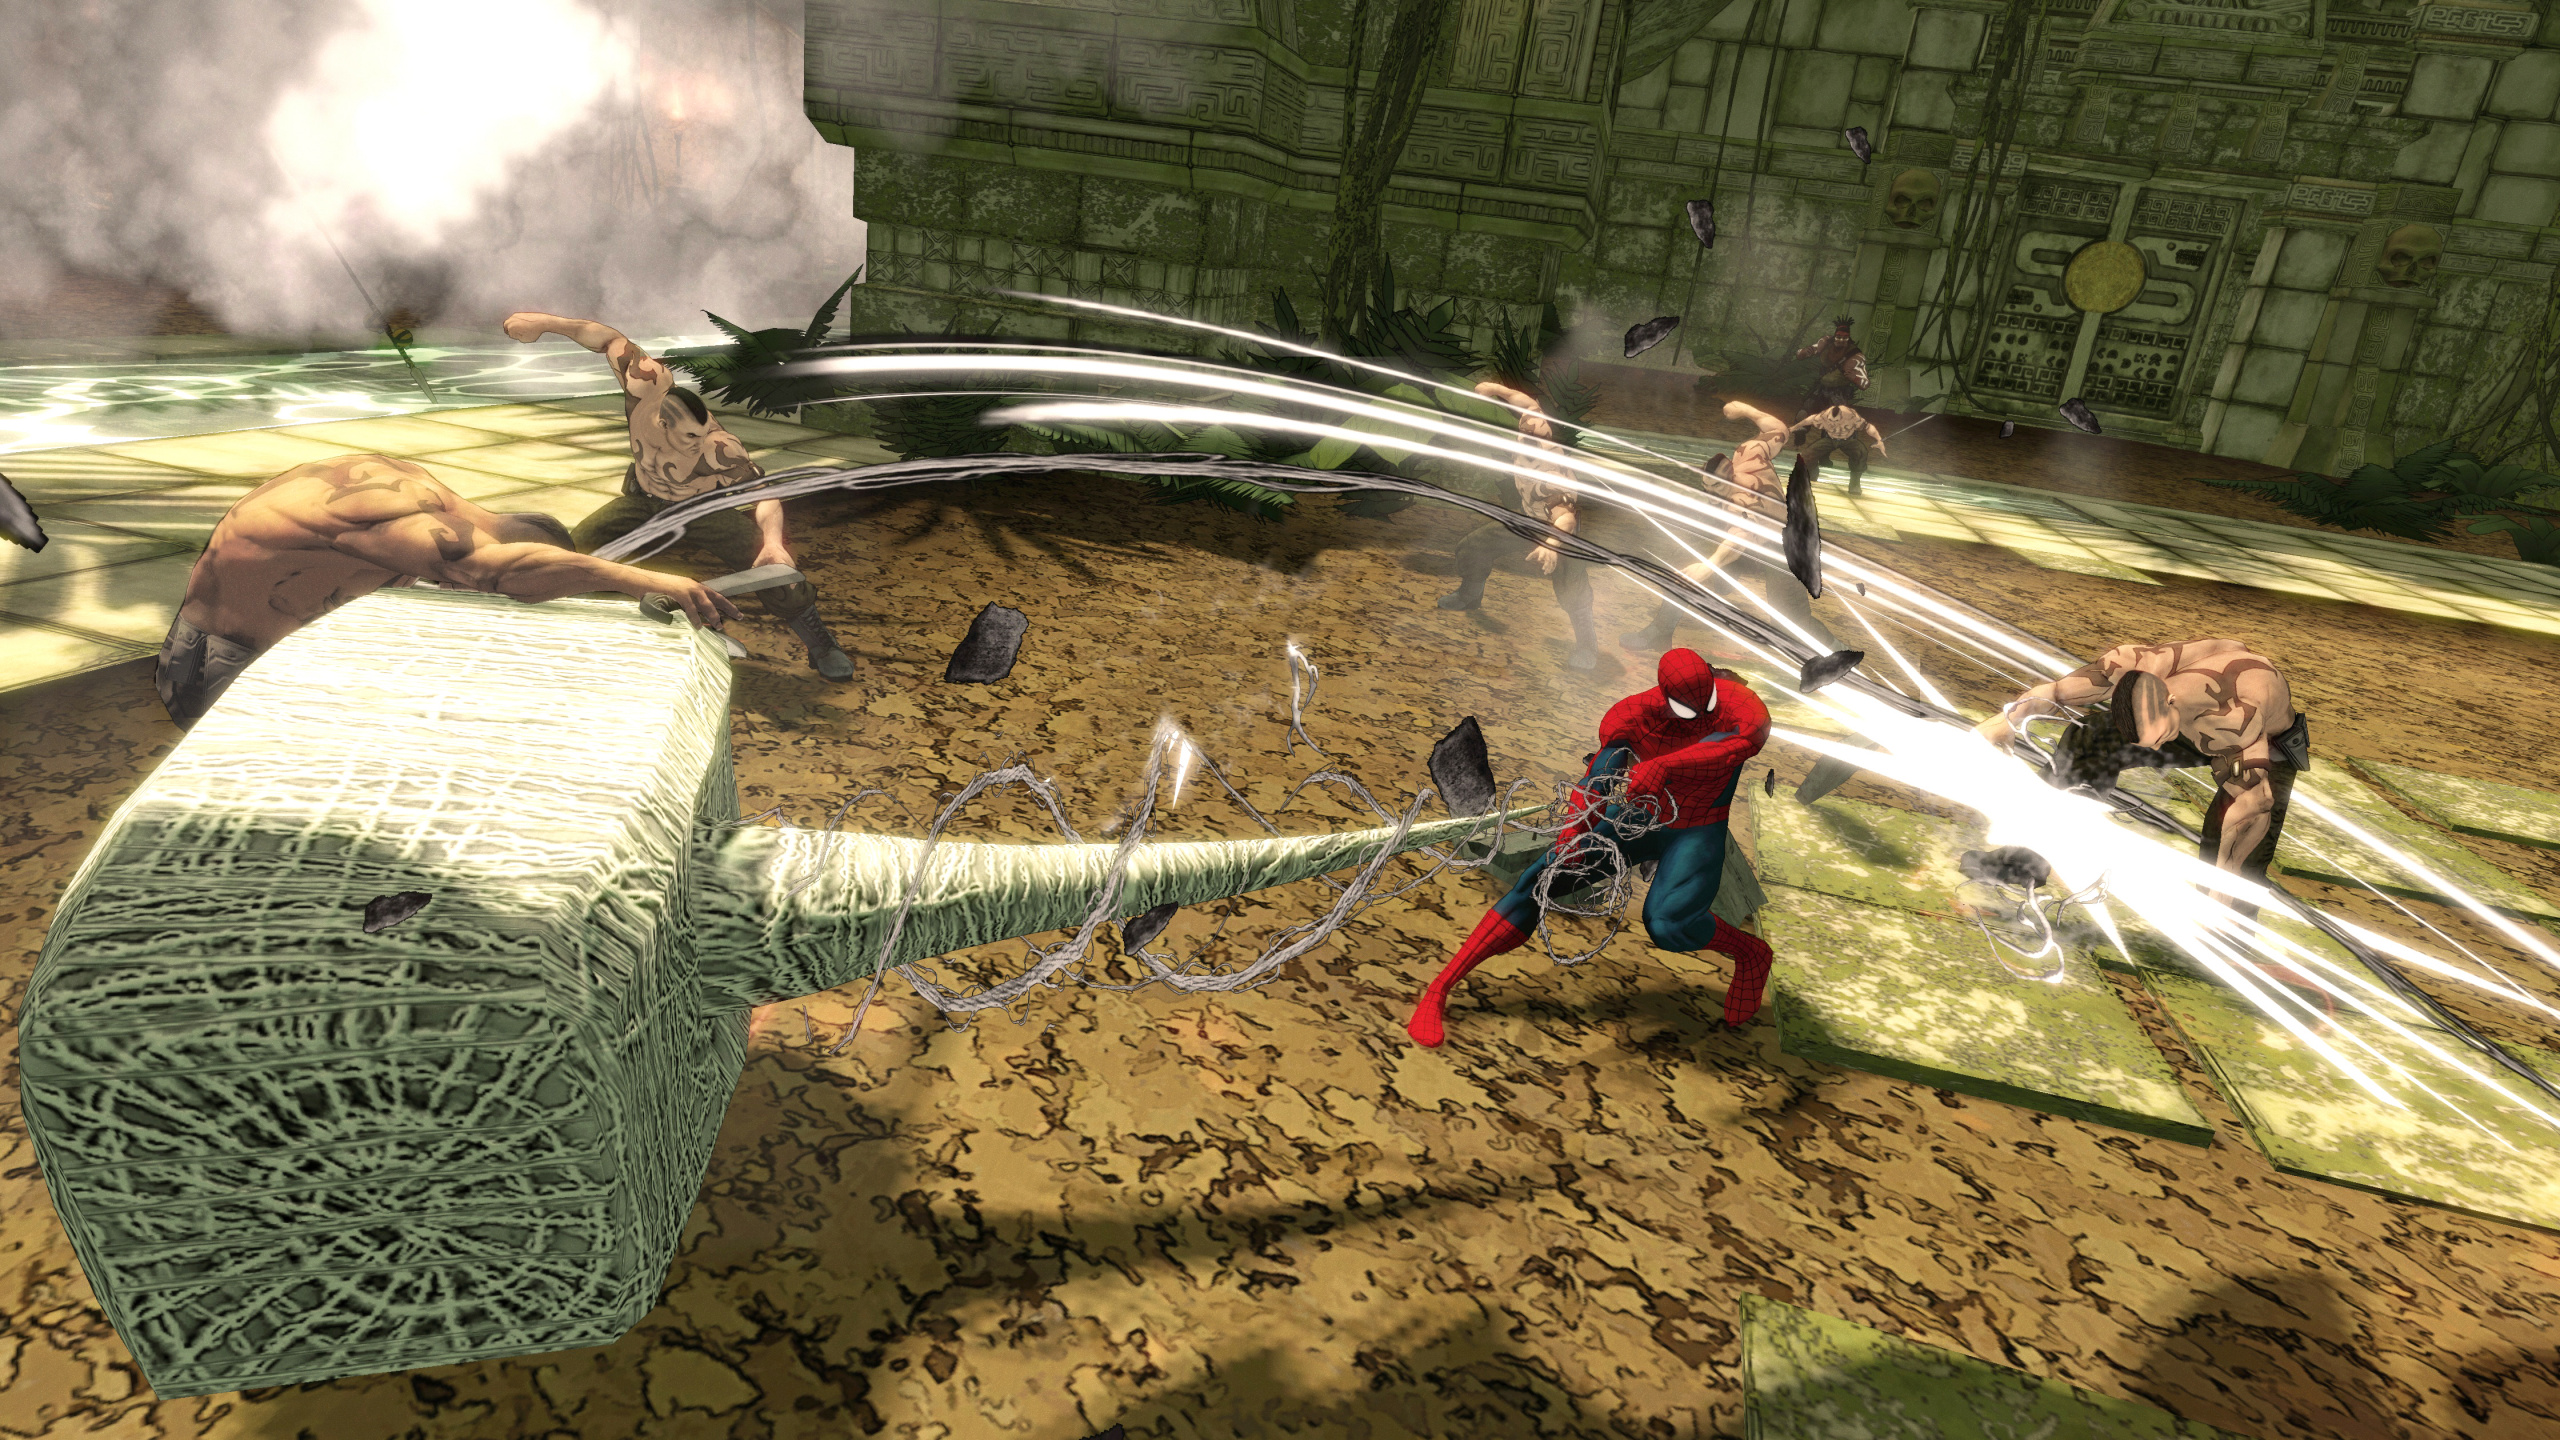 Spider-Man Shattered Dimensions, Spider-man, Xbox 360, Wii, Juego de Pc. Wallpaper in 2560x1440 Resolution